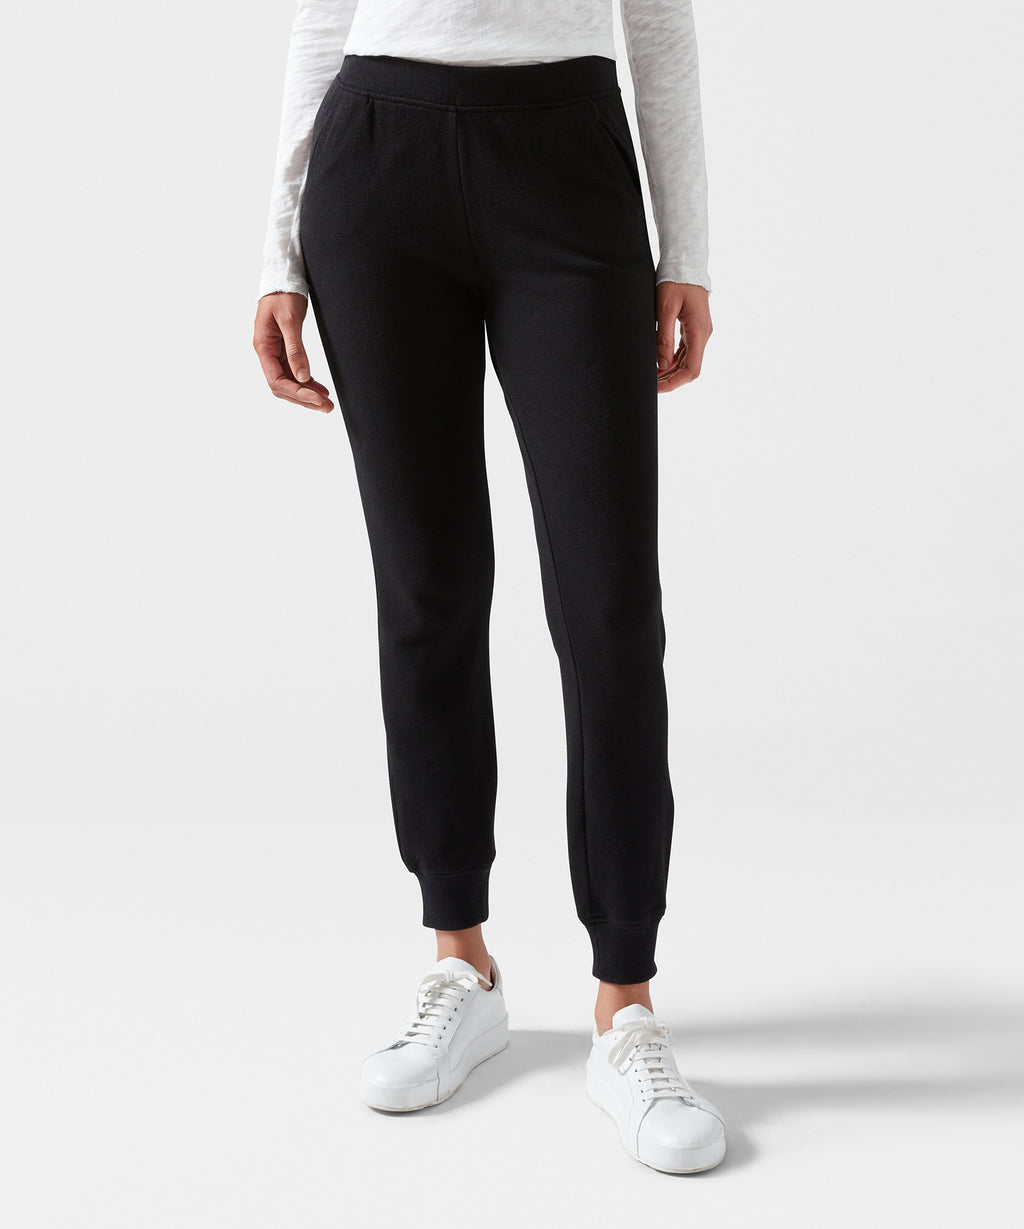 French Terry Sweatpants - Black